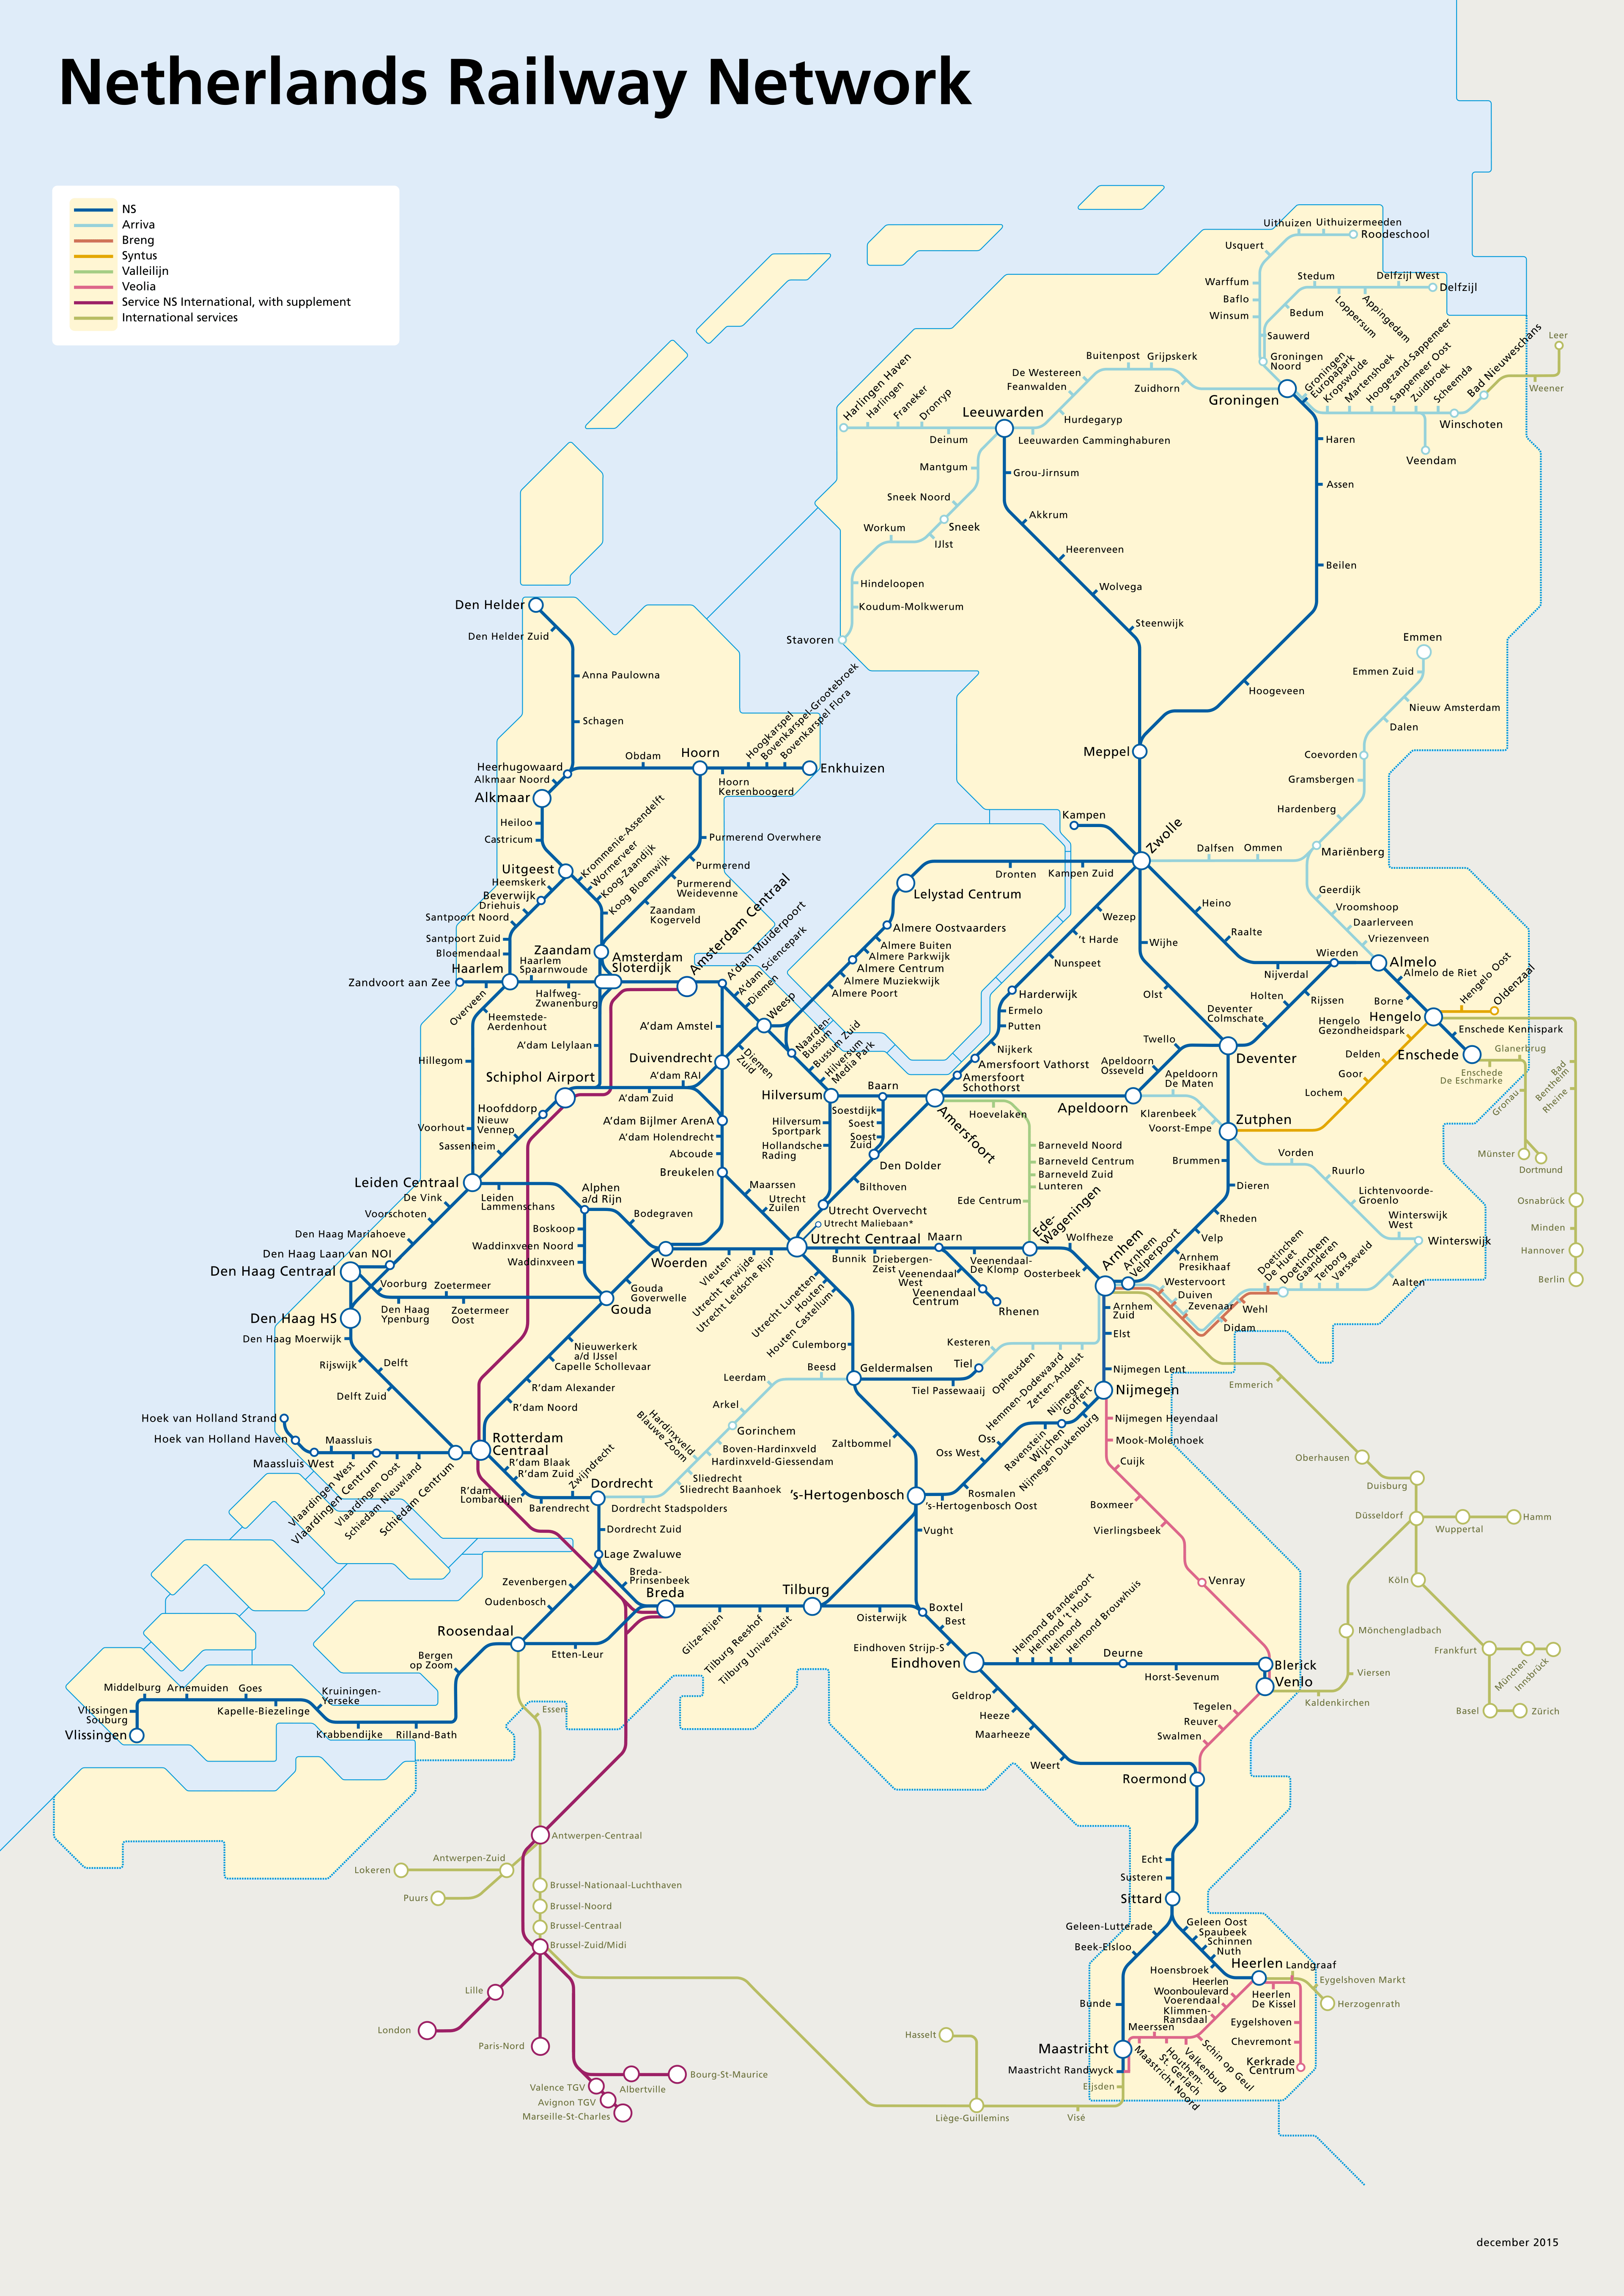 A (slightly outdated) map of the Dutch railway network.